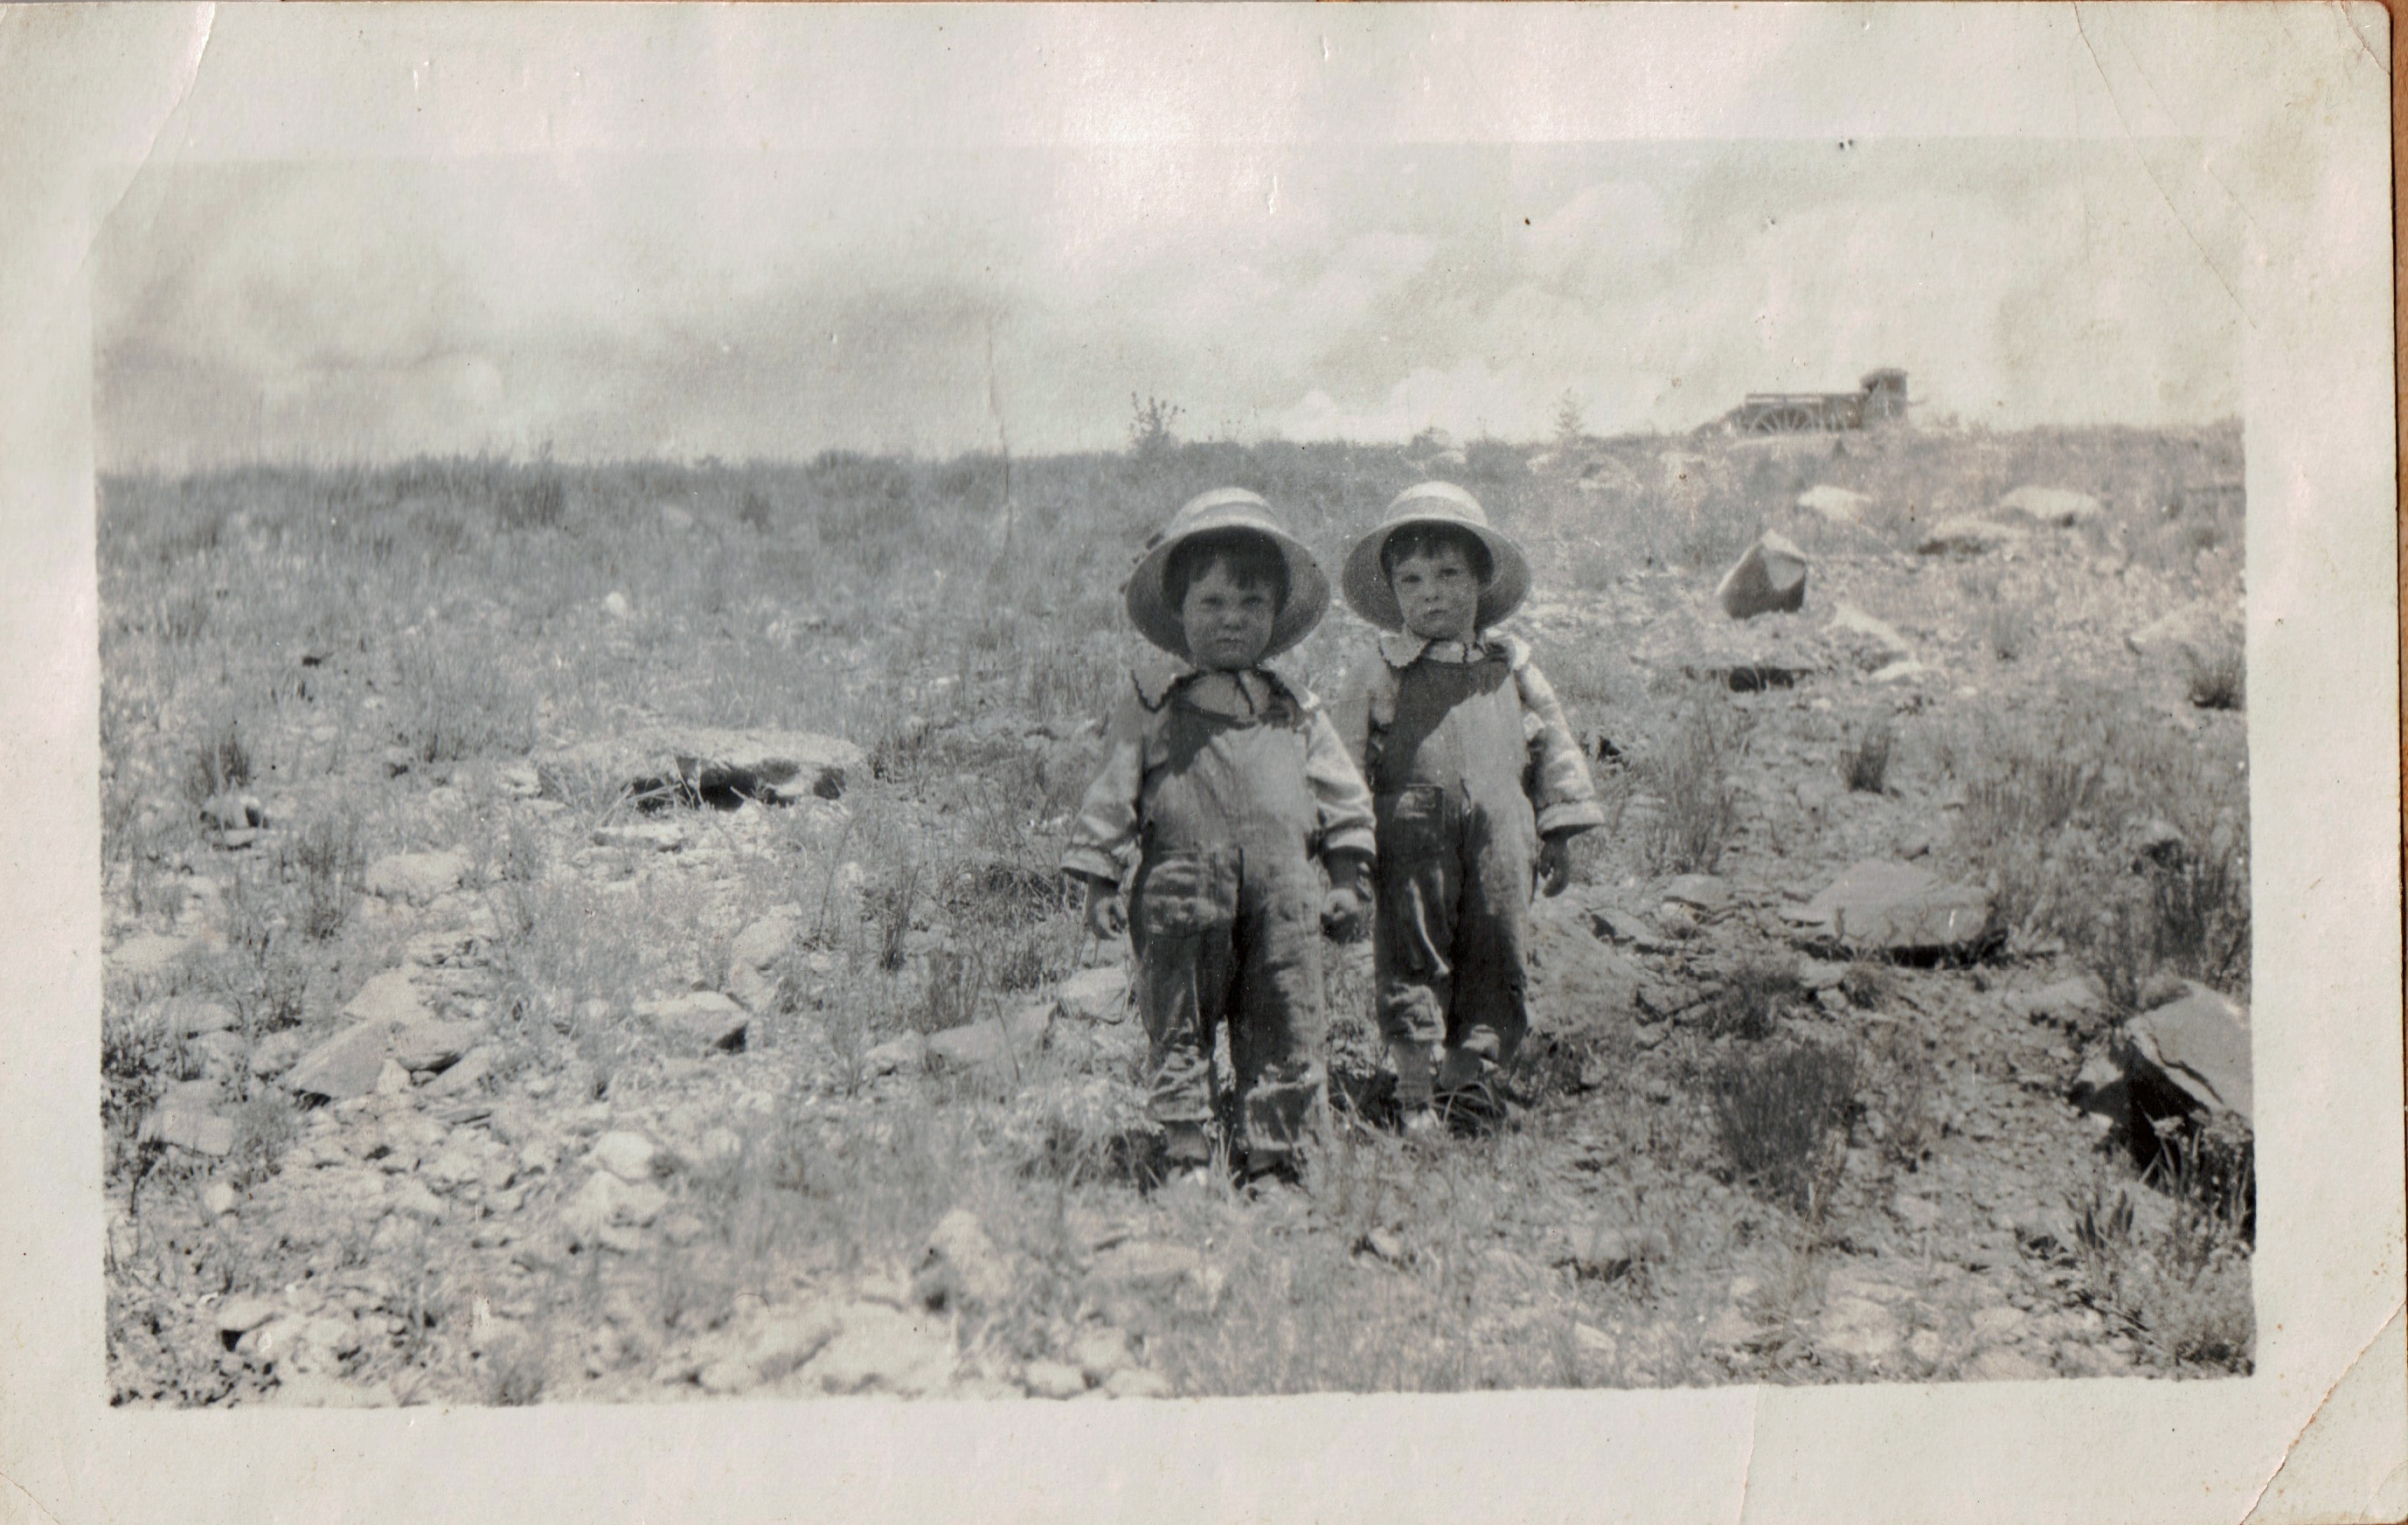 Keith and Kenneth Doggett, 1915